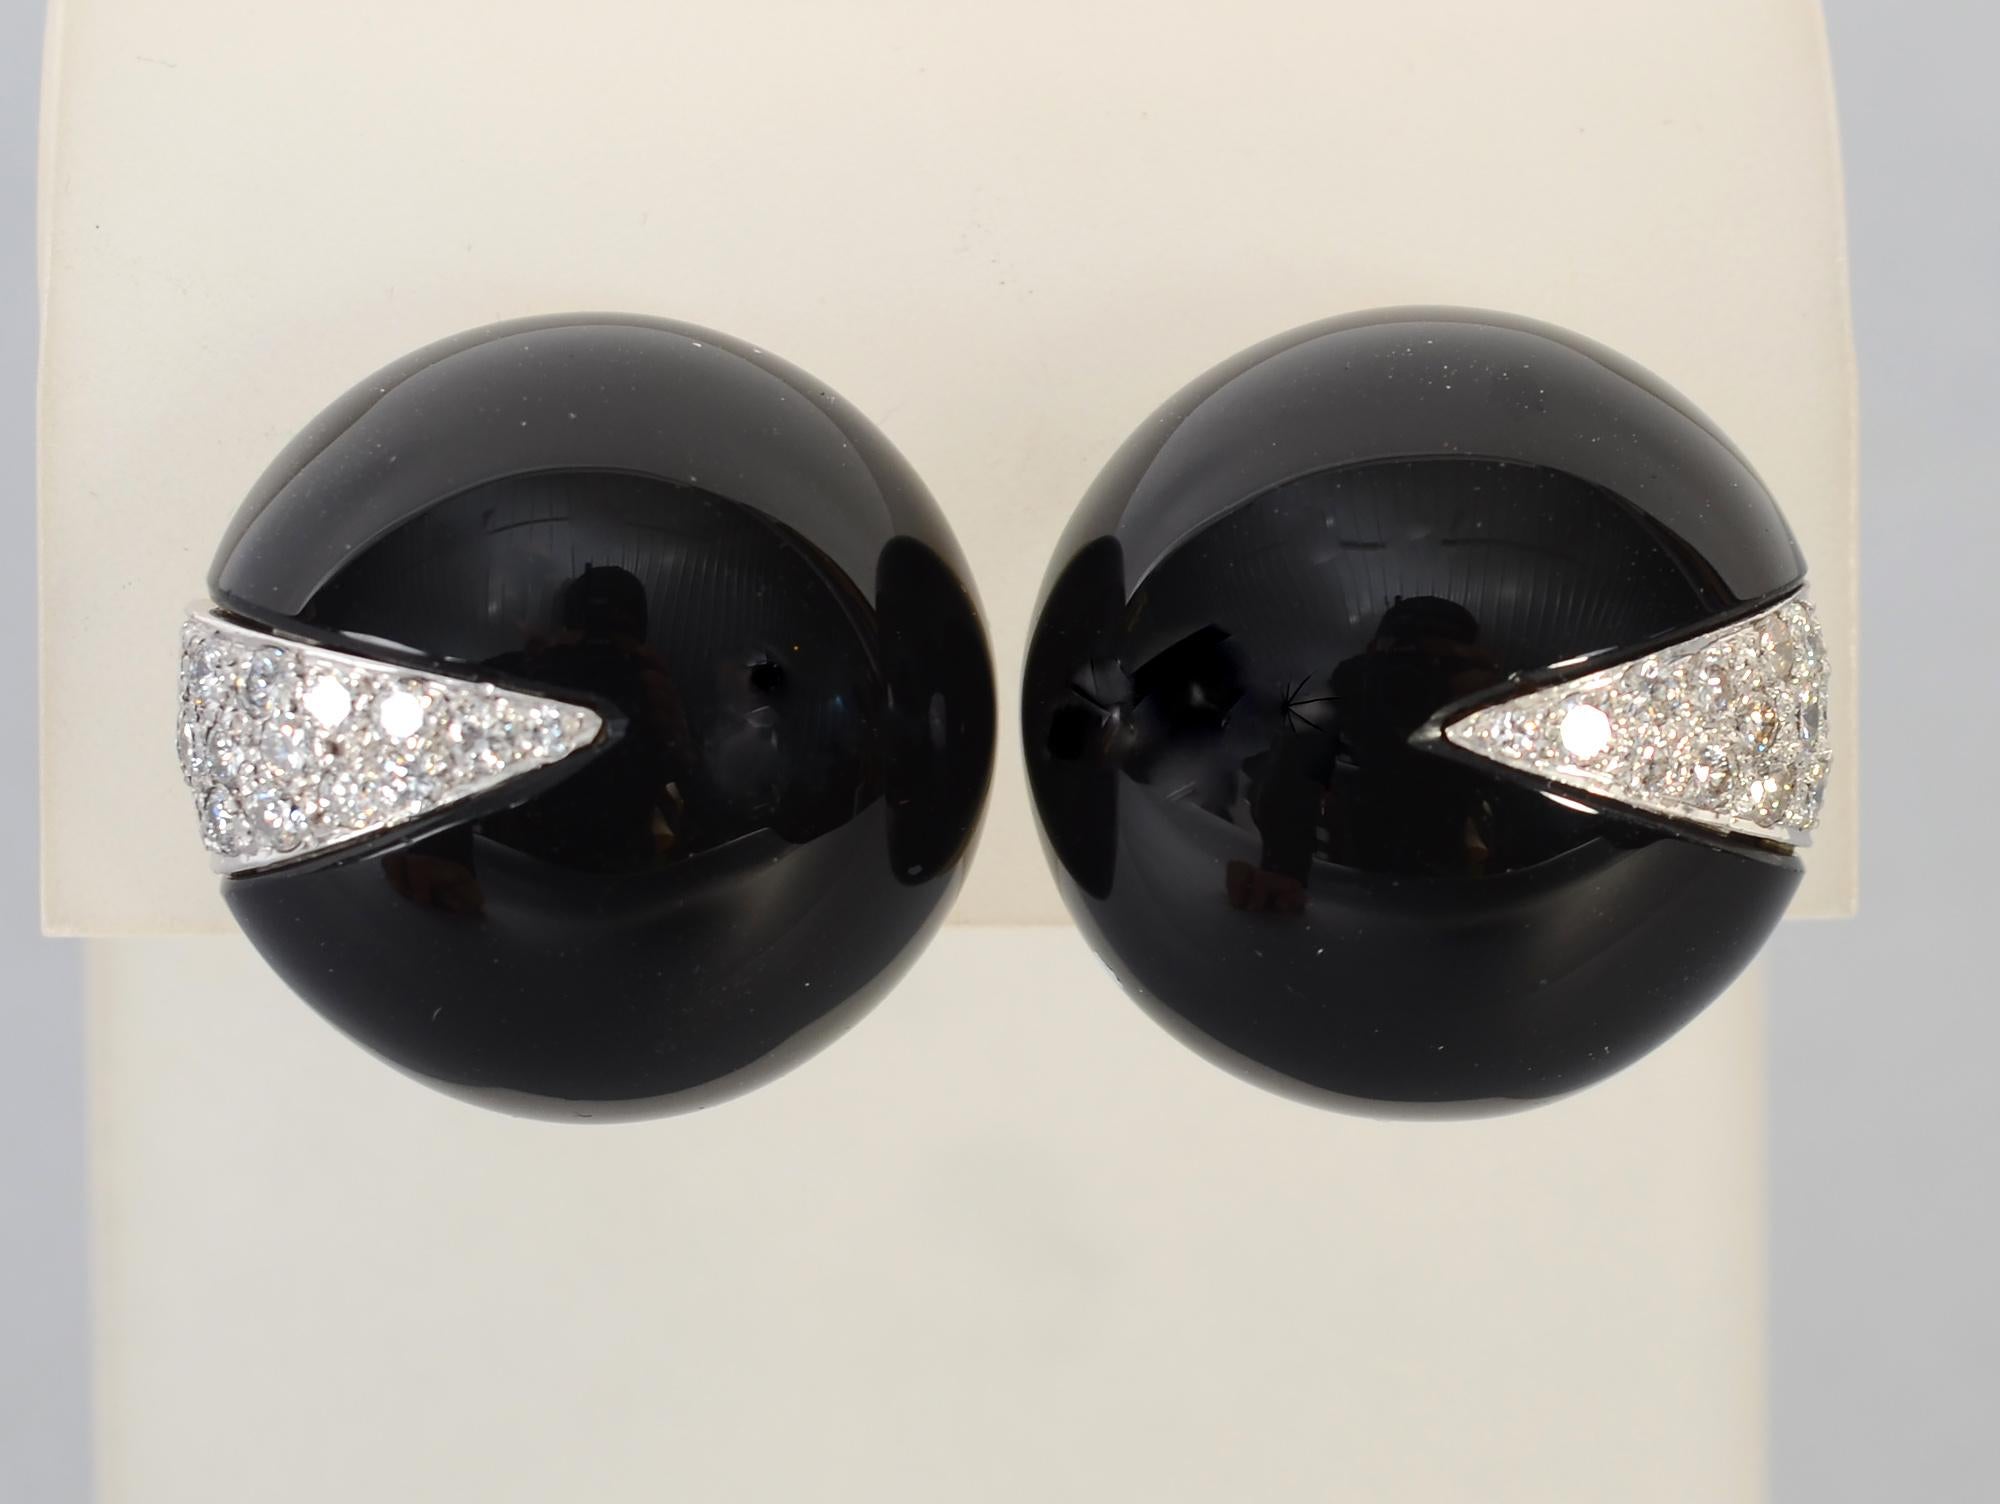 Chic onyx and diamond earrings by La Triomphe. The domed onyx is half and inch in height and 3/4